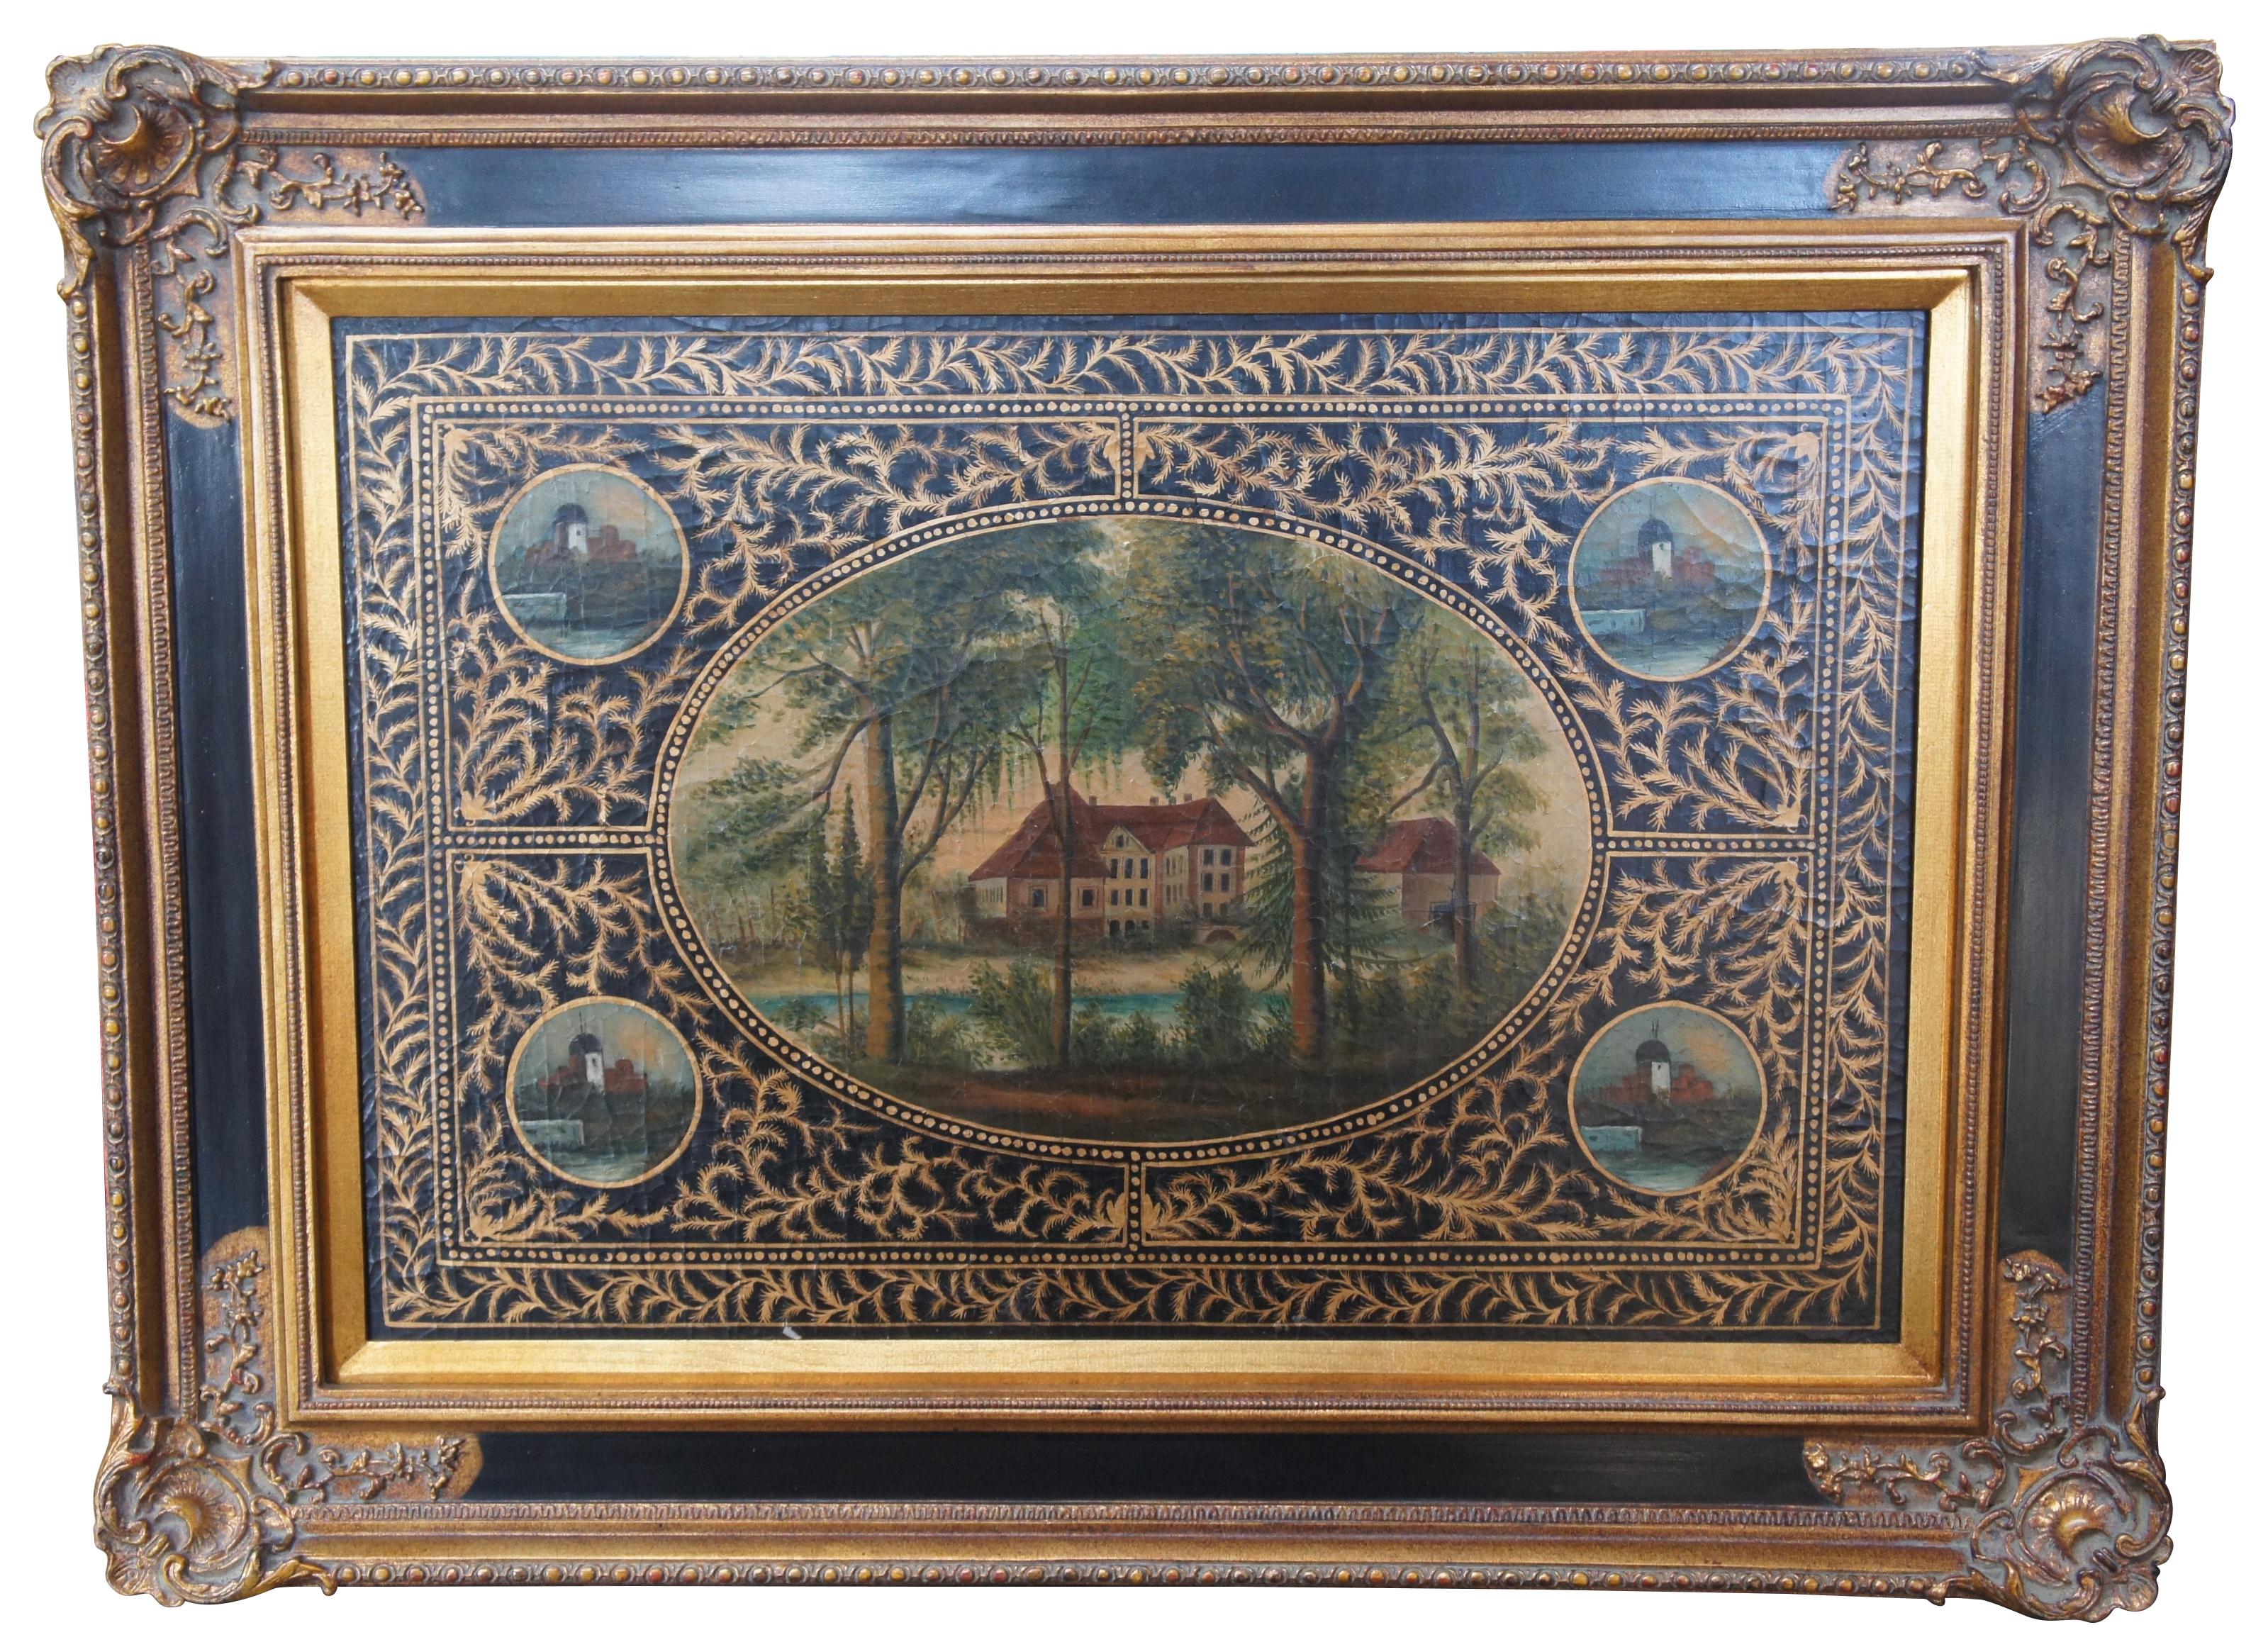 An elegant hand painted toleware landscape. Features colorful hand painted scenes set within cameos. A black background with gold foliate and beaded design. Framed within a Regency style back and gold frame.

Measures: 47